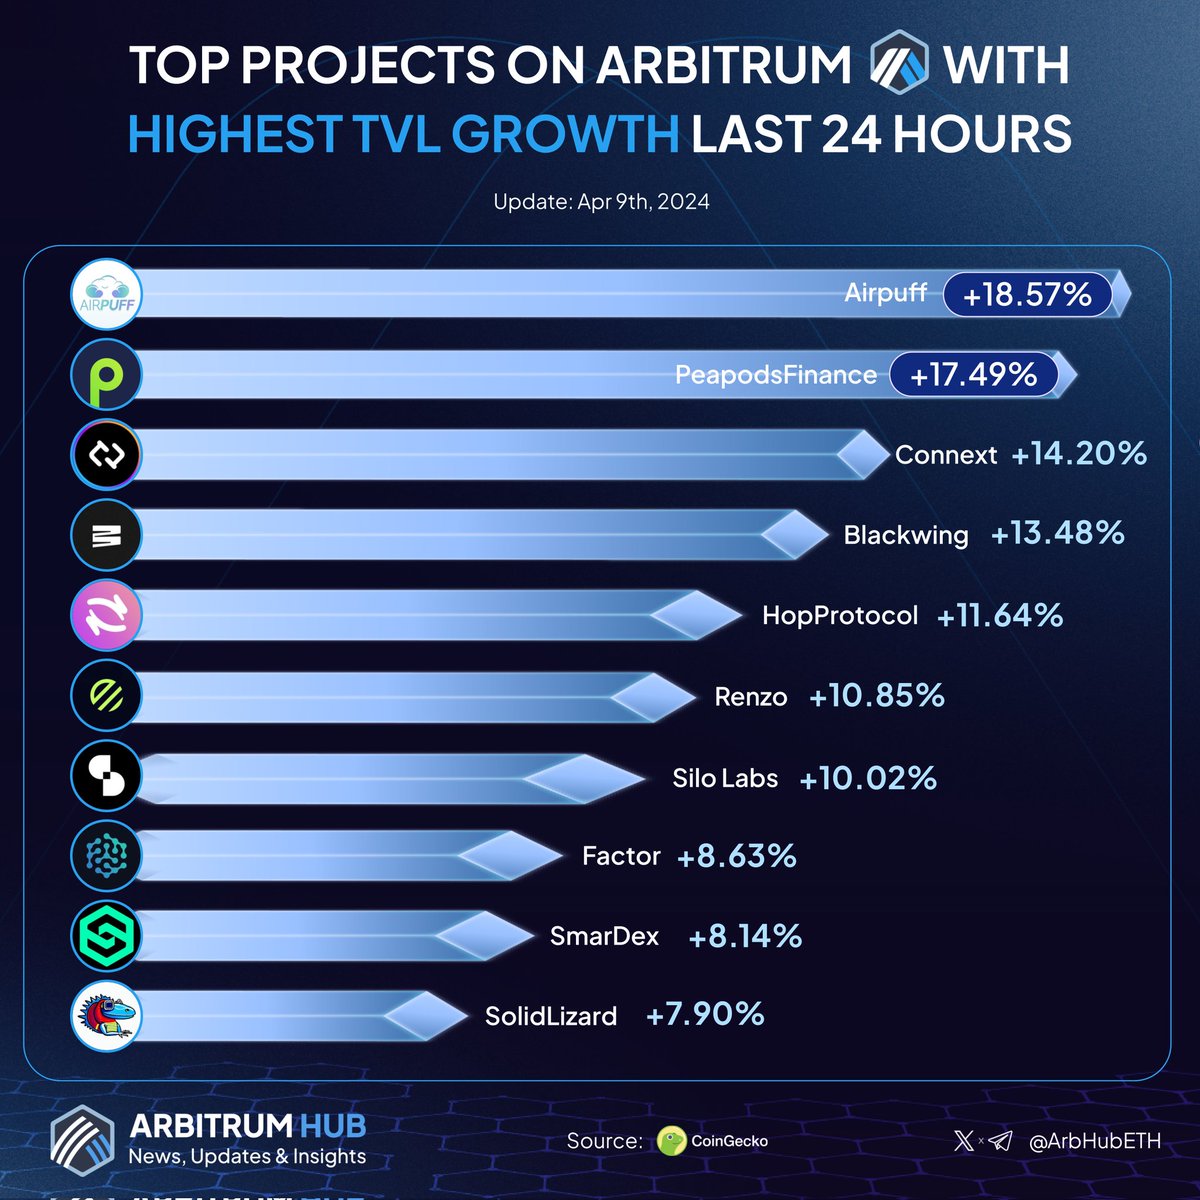 Let’s explore the leading projects on #Arbitrum by TVL growth last 24 hours! 💙🧡 🥇 @airpuff_io 🥈 @PeapodsFinance 🥉 @Connext @blackwing_fi @HopProtocol @RenzoProtocol @SiloFinance @FactorDAO @SmarDex @solidlizardfi Feel free to comment below and let us know your preferred…